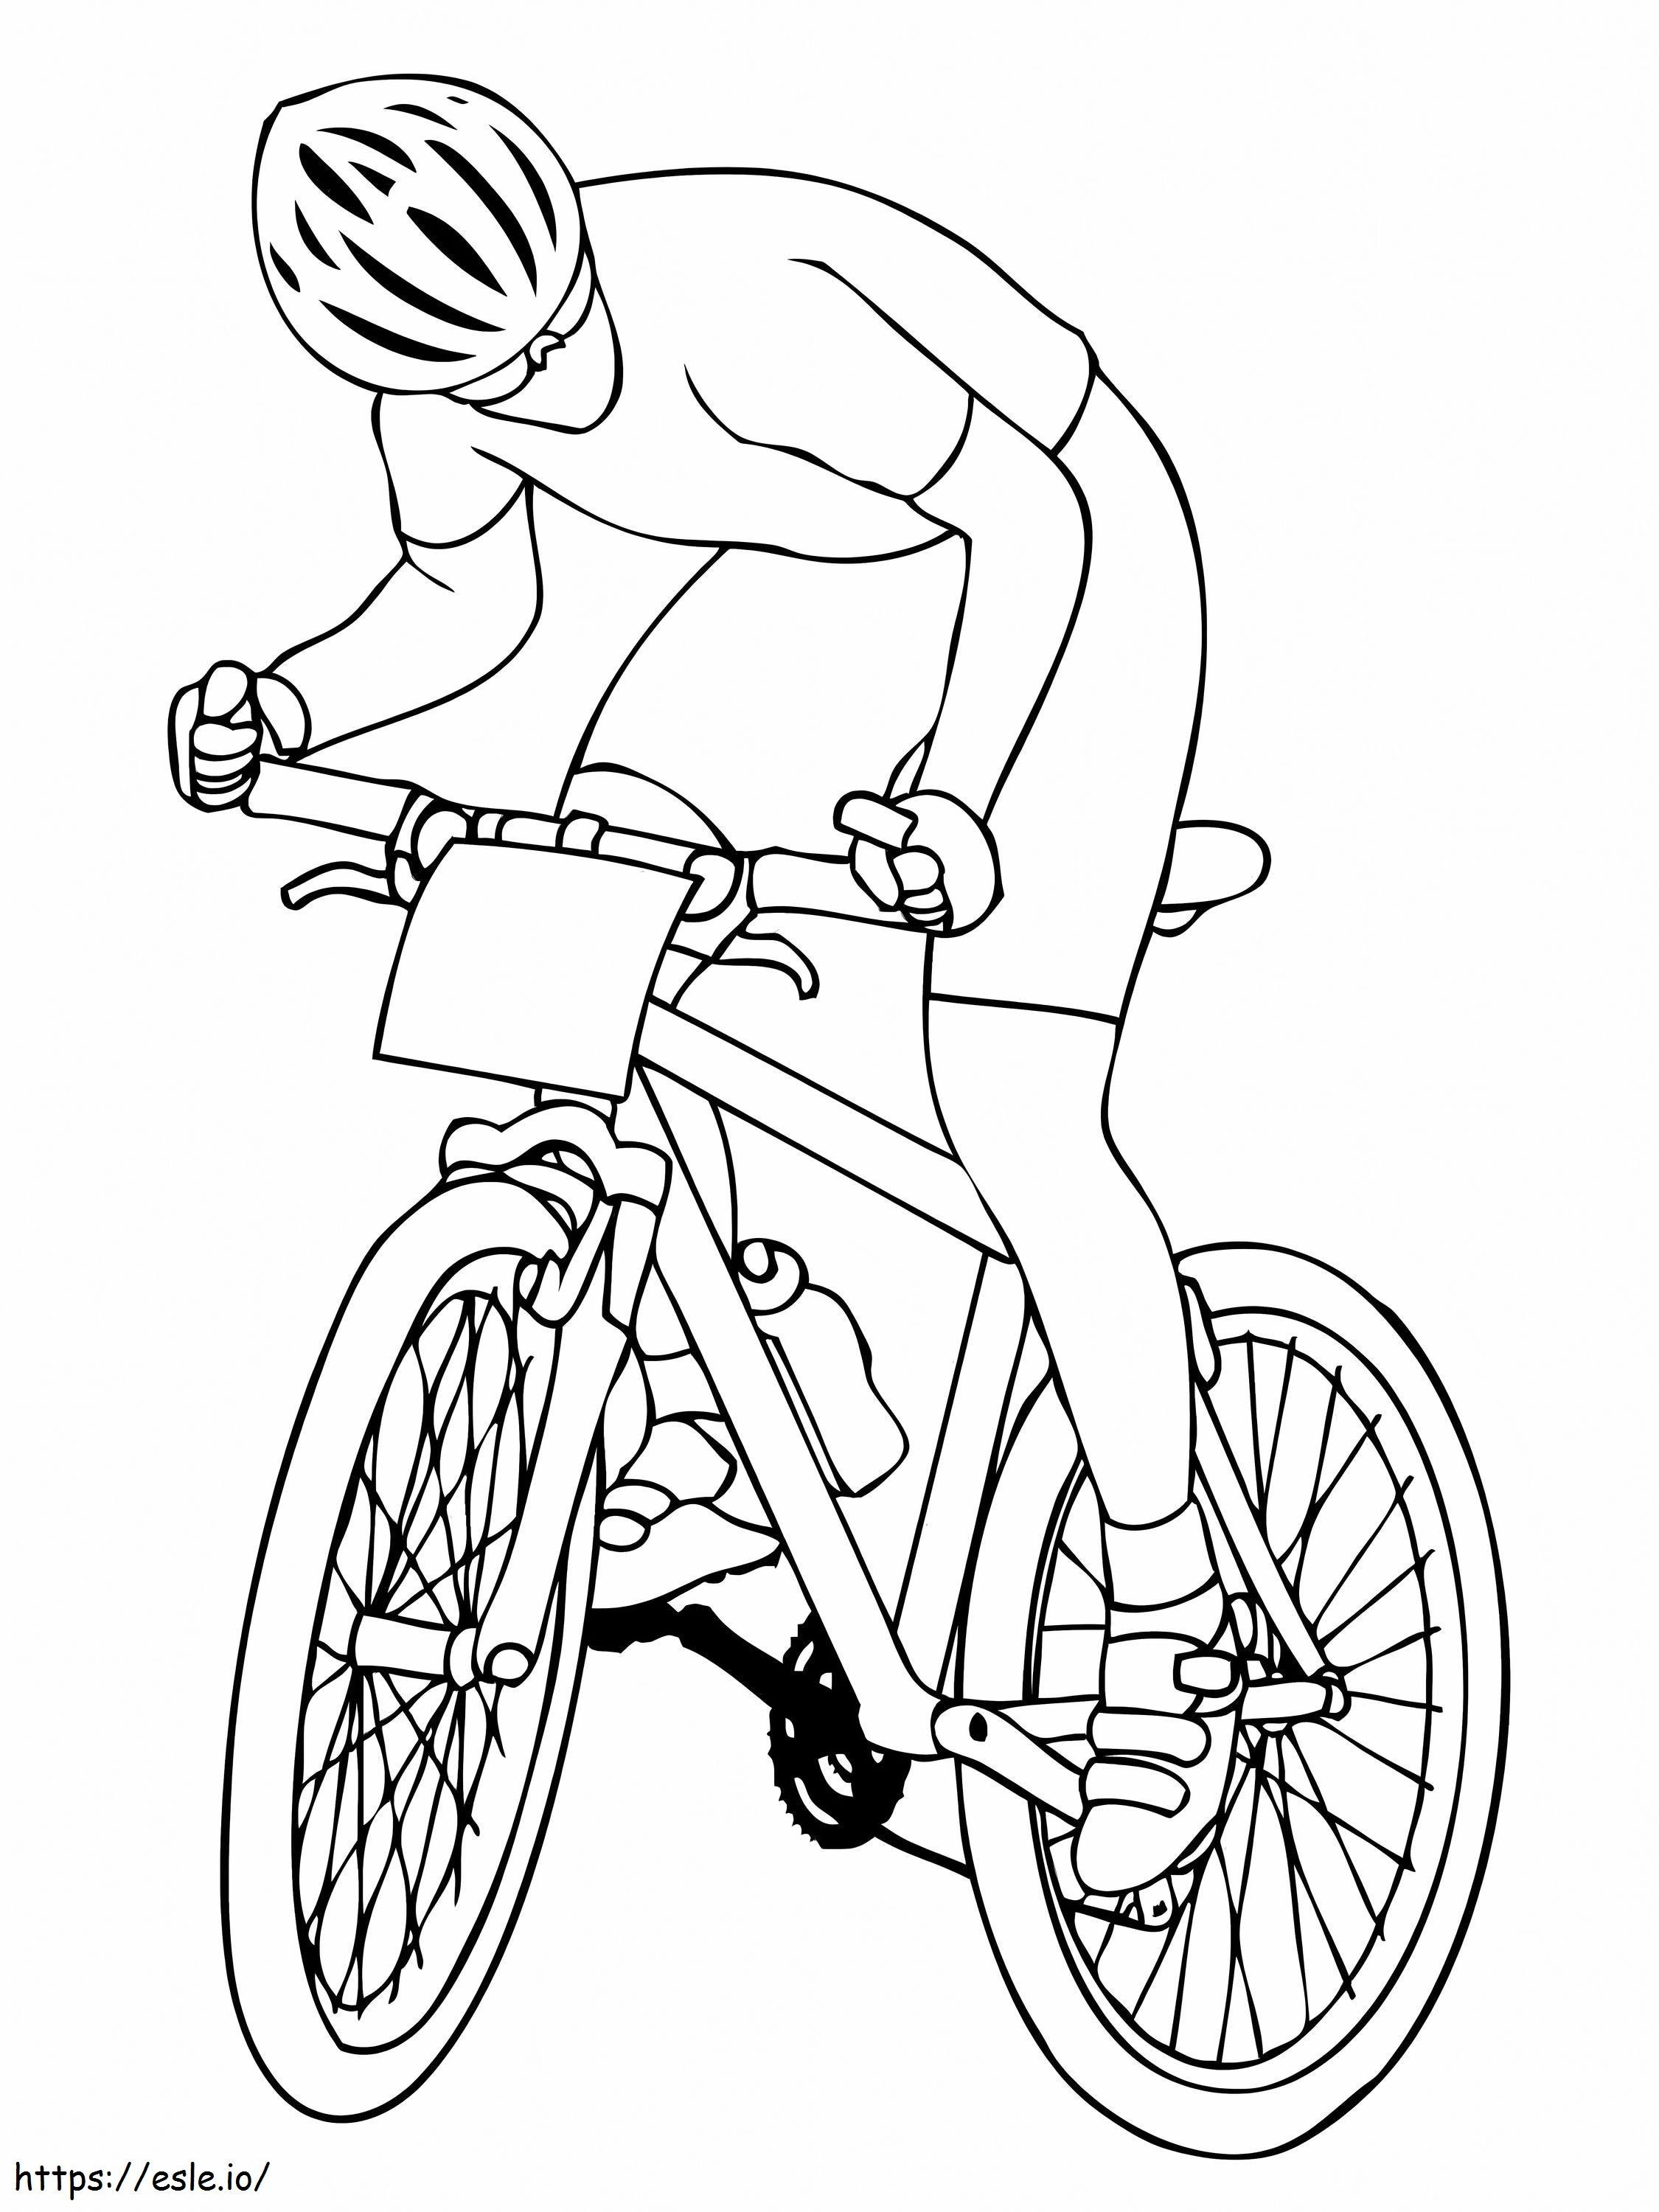 A Cyclist coloring page